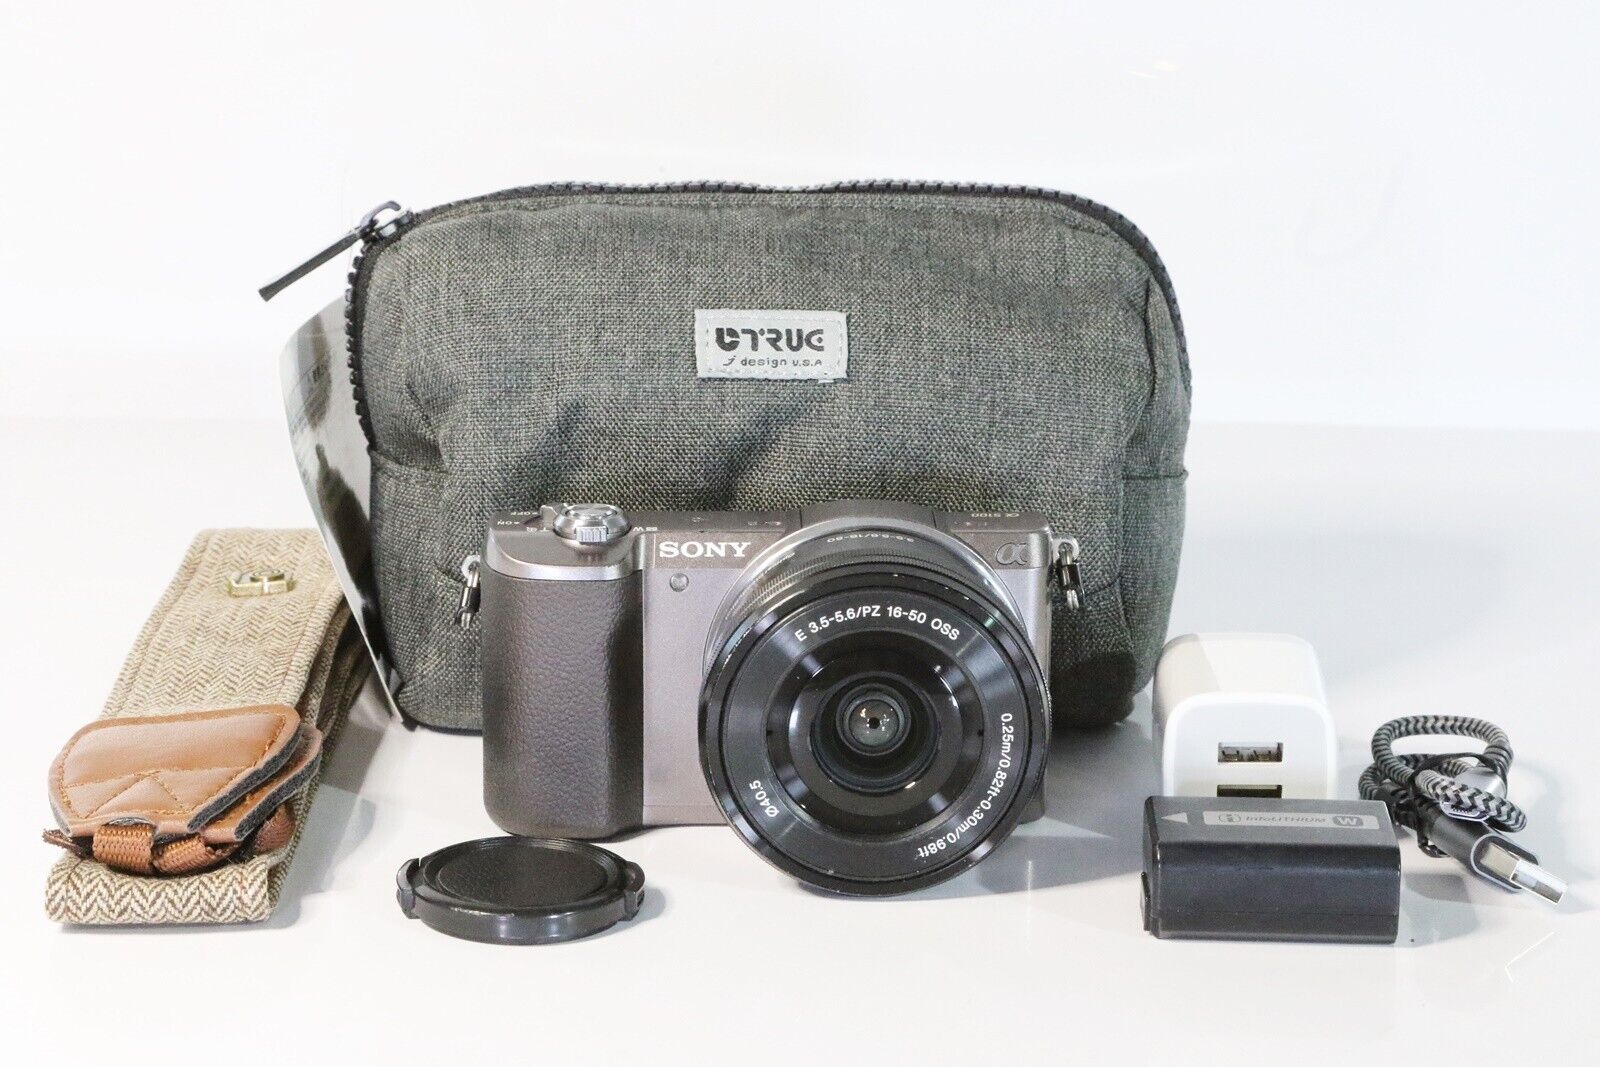 Sony Alpha a5100 Mirrorless Brown Power Lens Kit w/ Soft Case from Japan B068